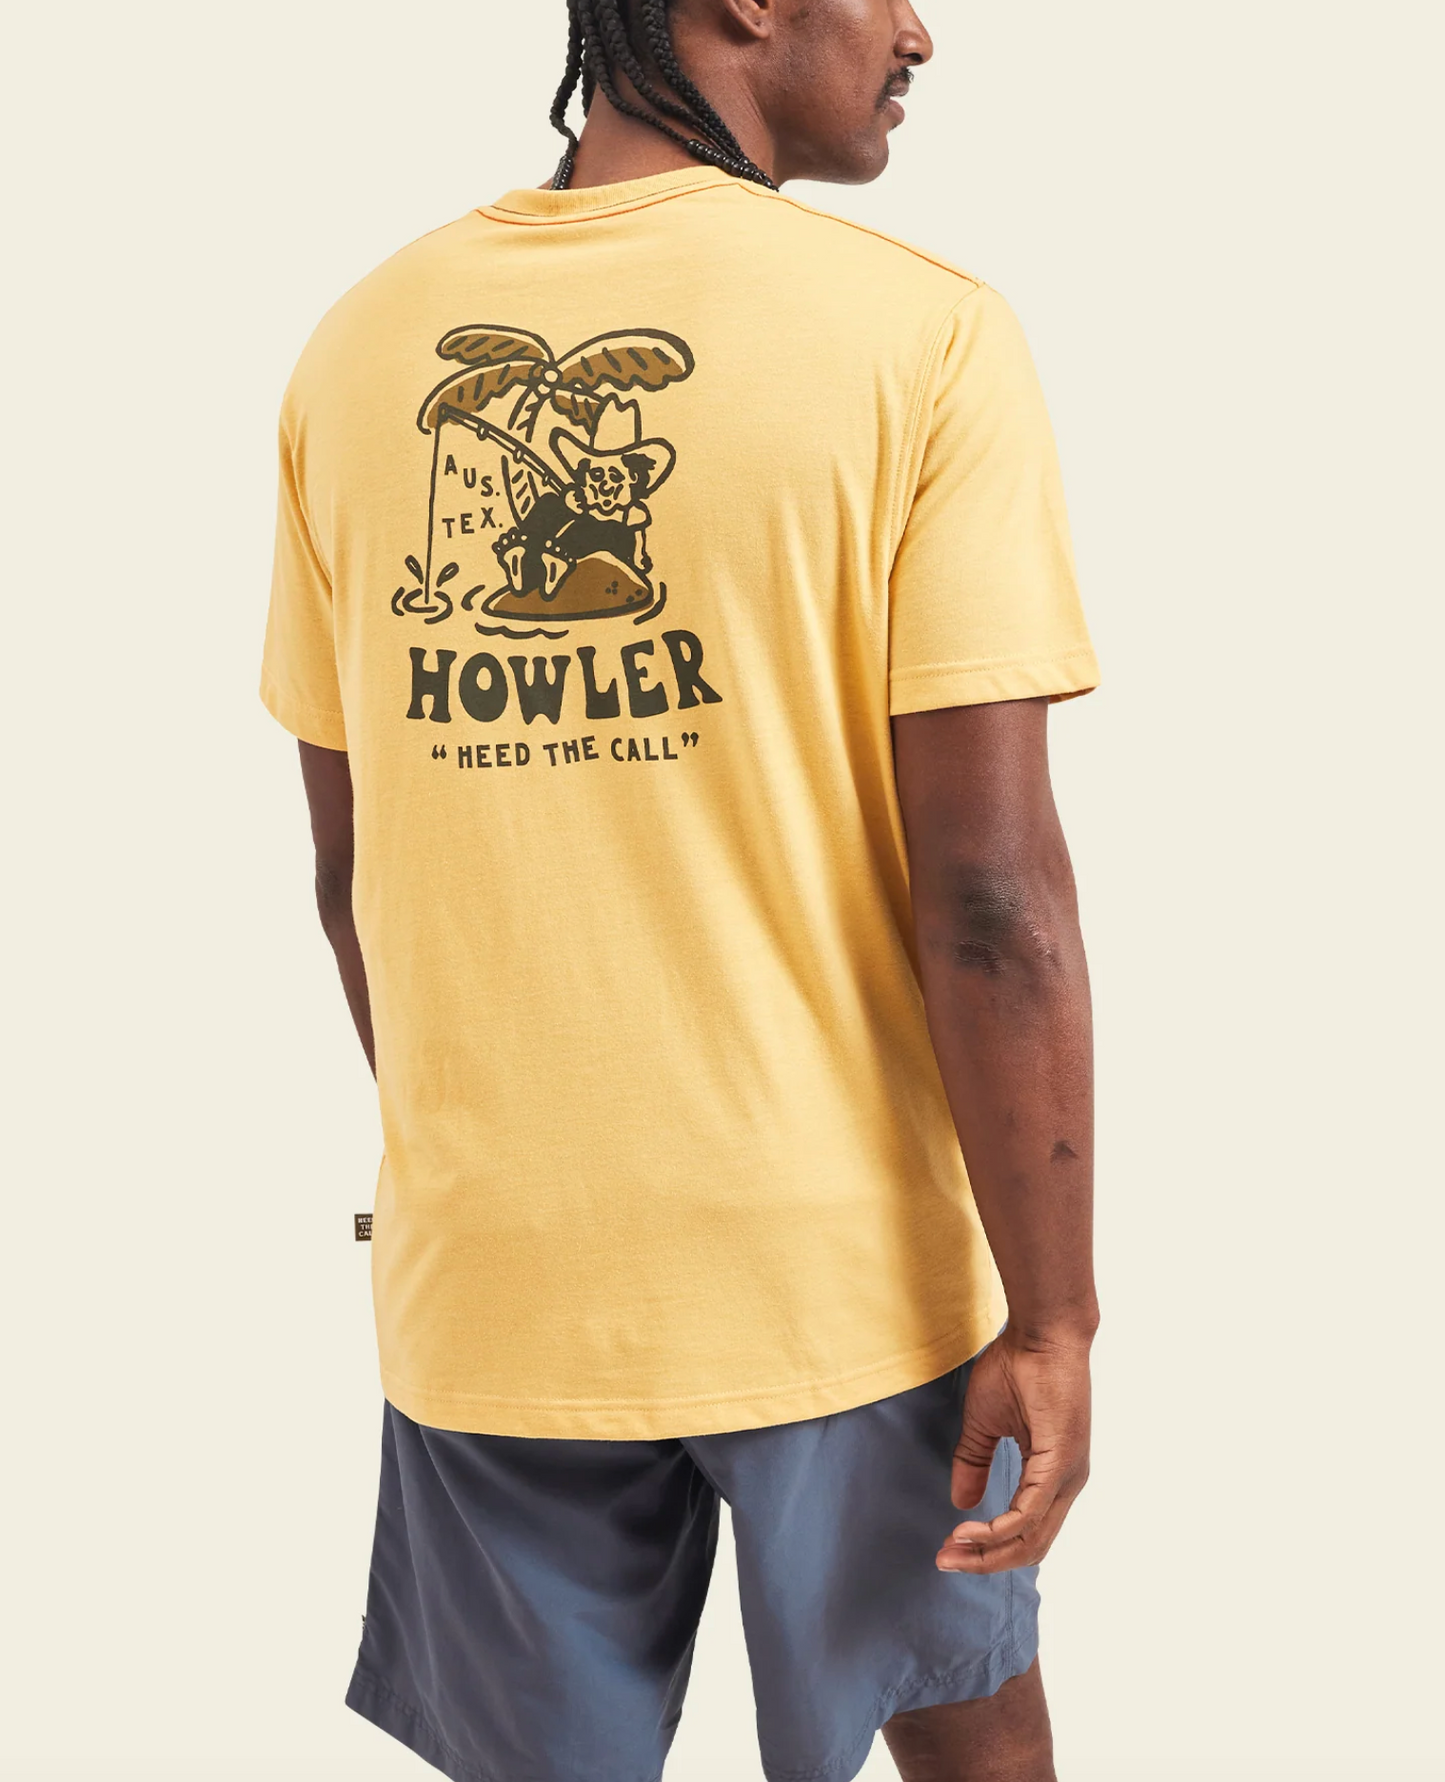 Howler Brothers Select T, Island Time